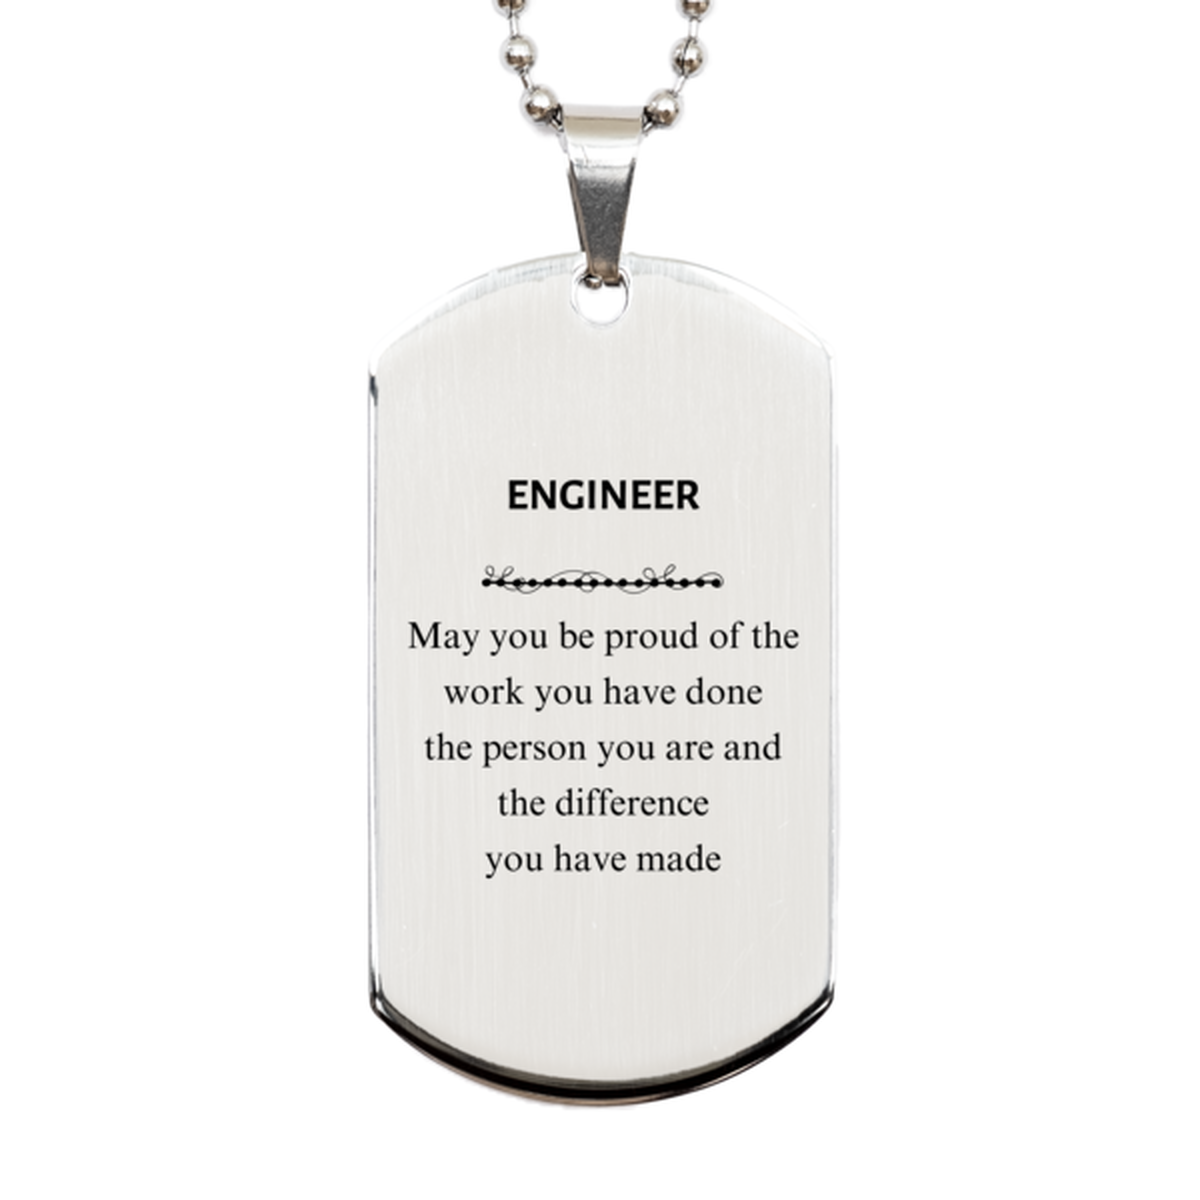 Engineer May you be proud of the work you have done, Retirement Engineer Silver Dog Tag for Colleague Appreciation Gifts Amazing for Engineer